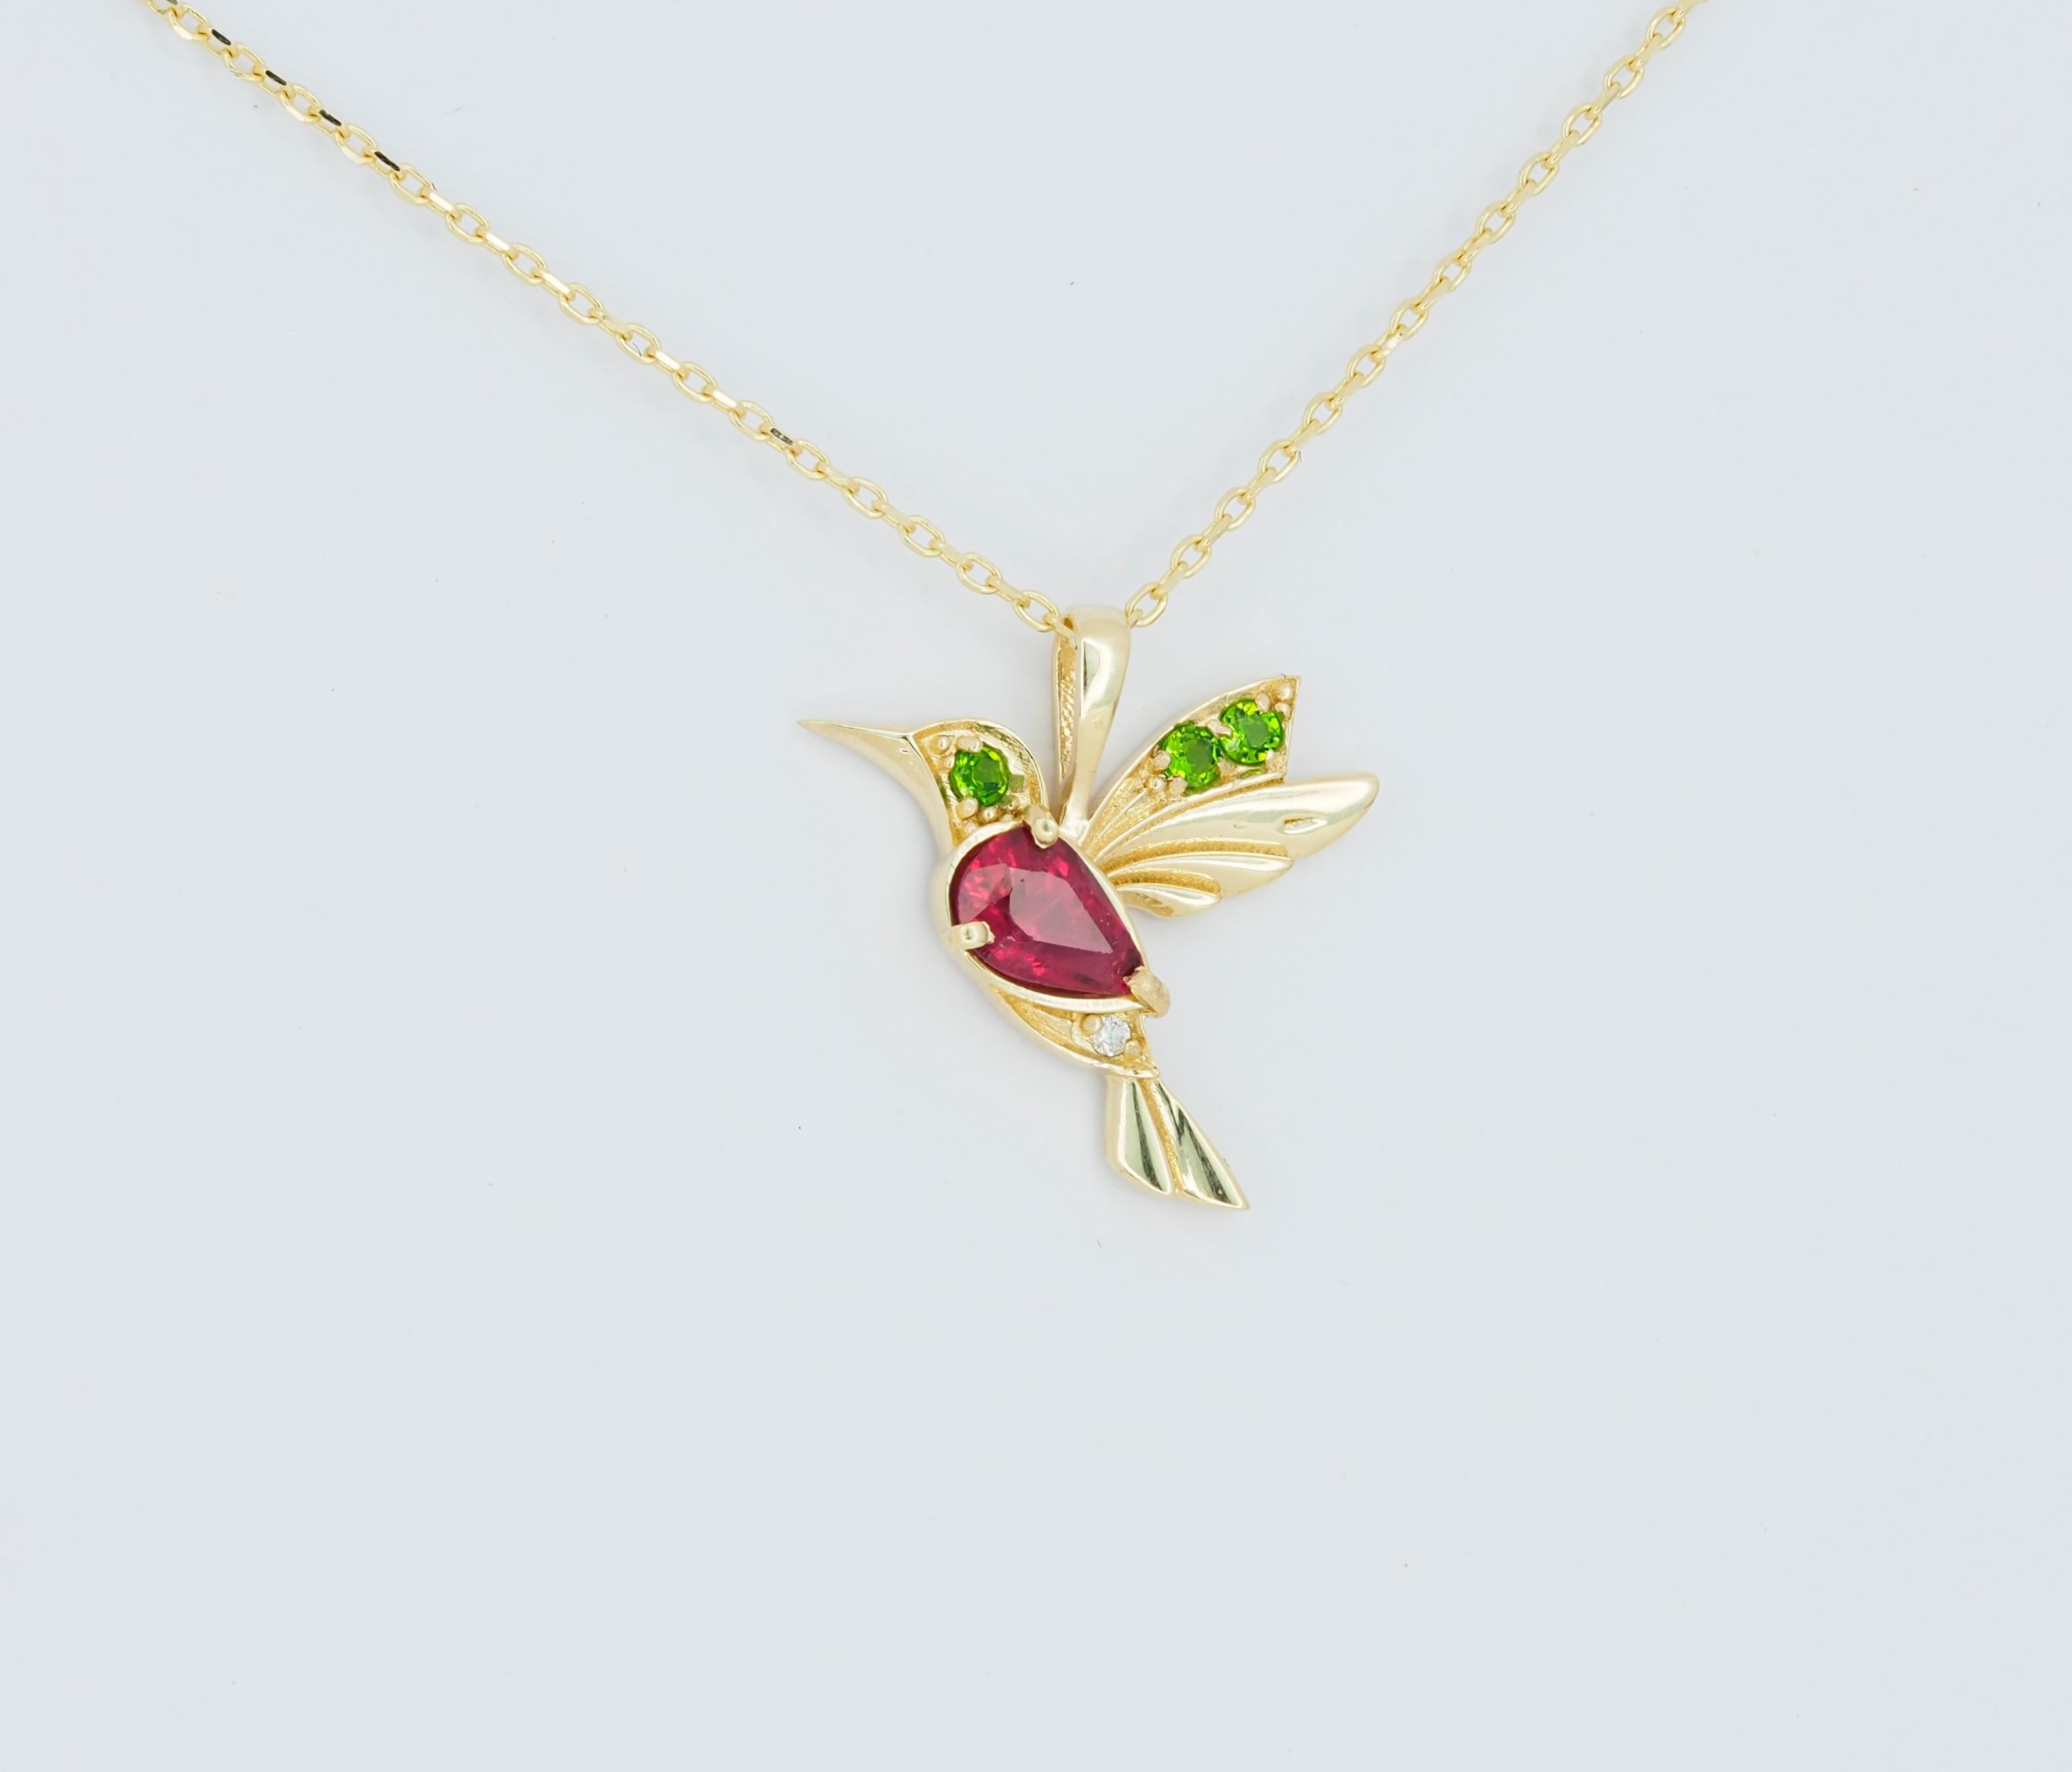 14k Gold Hummingbird Pendant with Rubies, Bird Pendant with Colored Gemstones For Sale 5